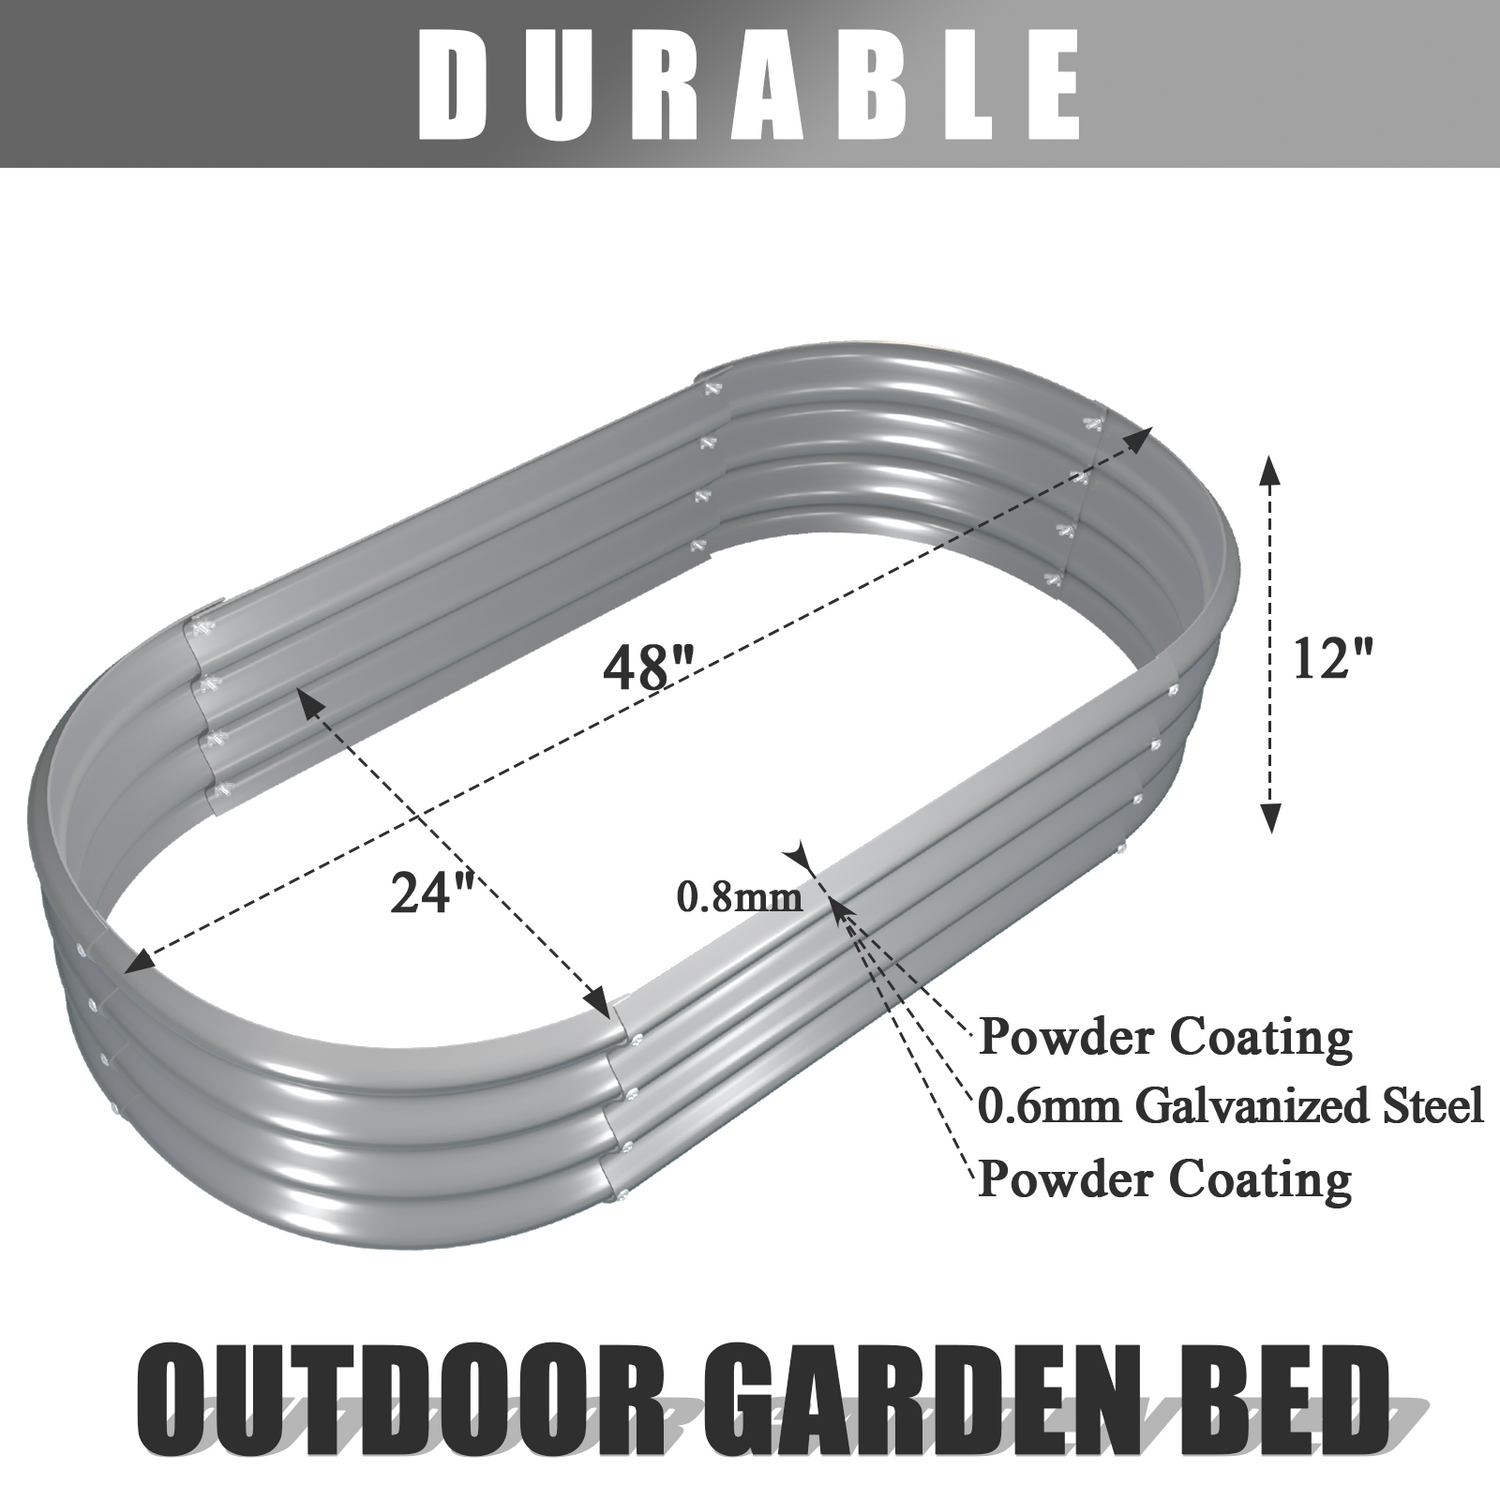 Bundle of 6 | 12" Tall 4x2ft Oval Metal Raised Garden Beds